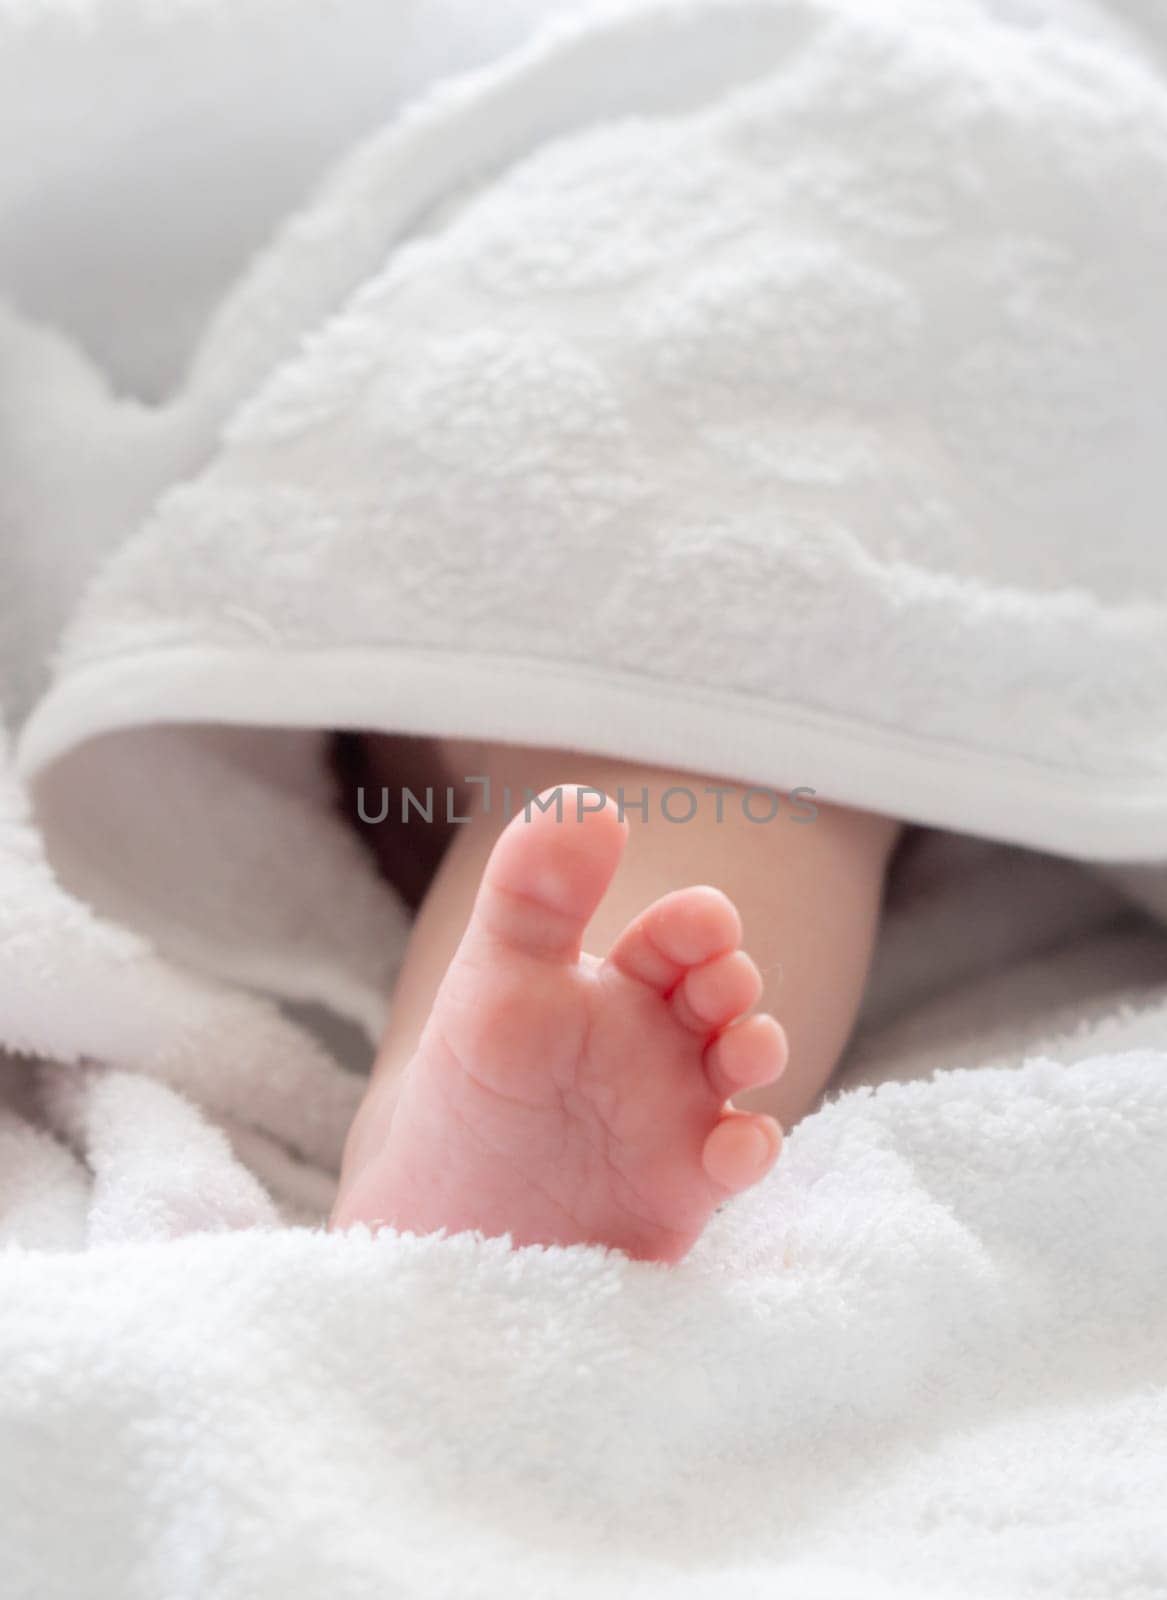 New life's touch: infant foot glimpsed under a white towel by Mariakray